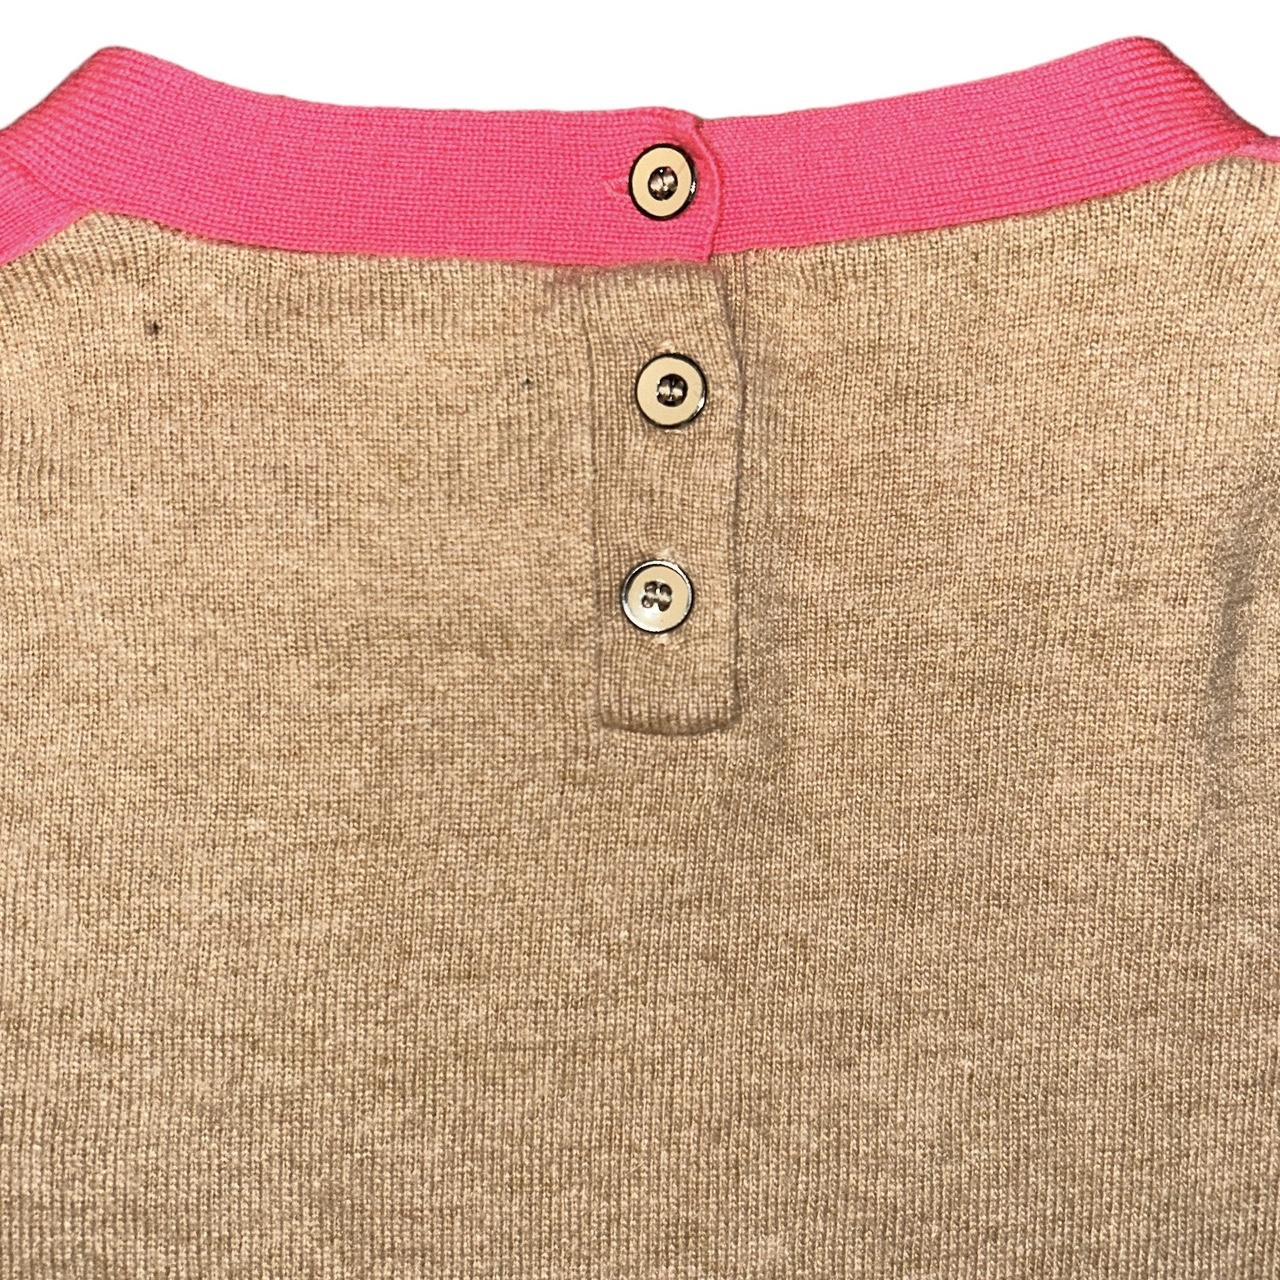 Crewcuts by J.Crew Tan and Pink Jumper (3)